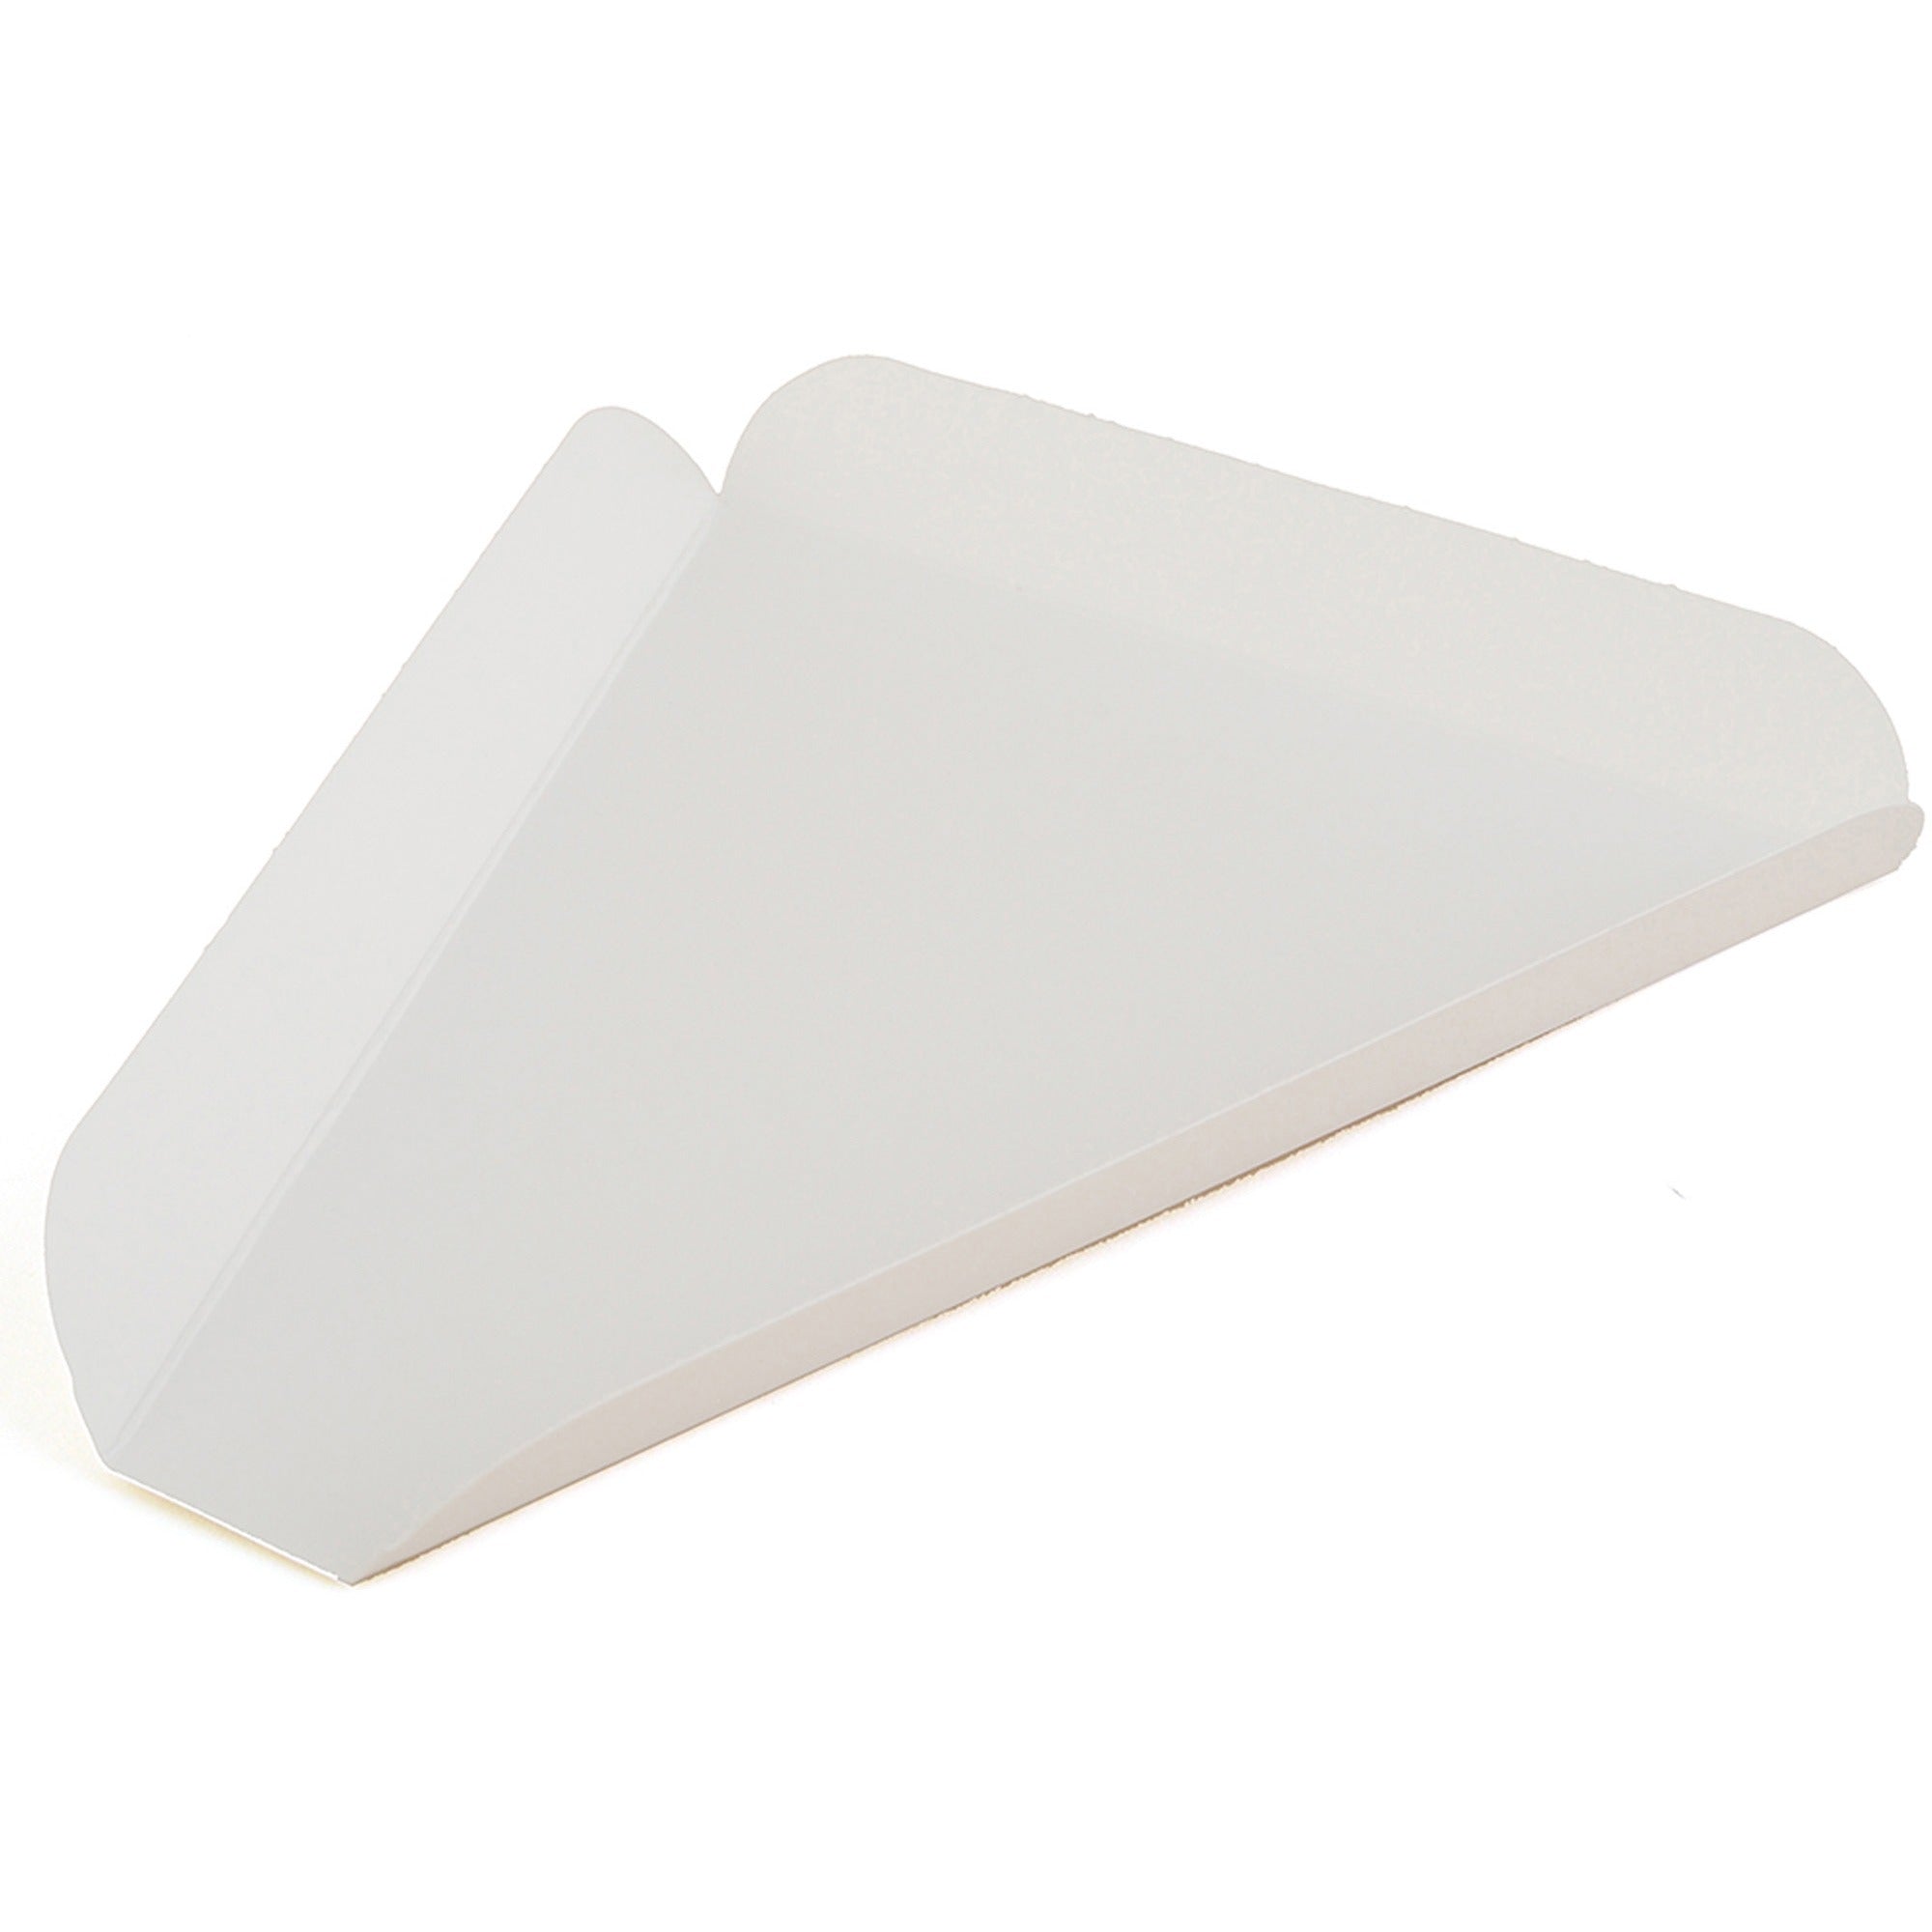 sepg-southern-champ-pizza-wedge-trays-serving-pizza-white-paper-body-500-carton_egs009078 - 1